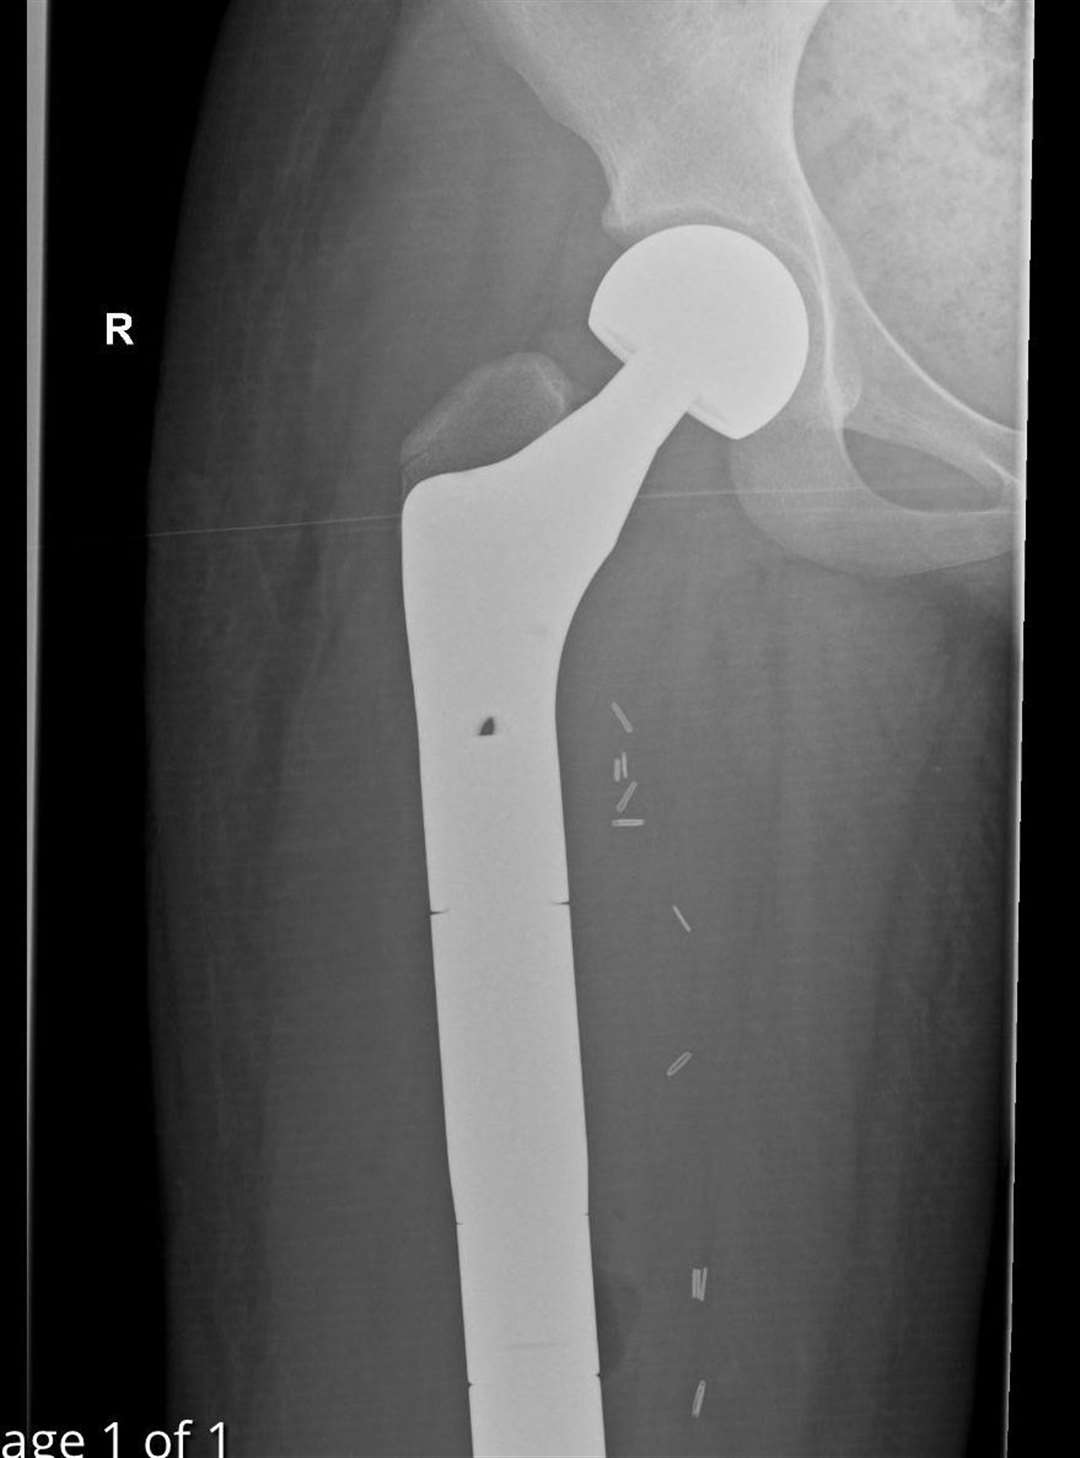 An x-ray of the implant that replaced Ivie Adam's right femur bone